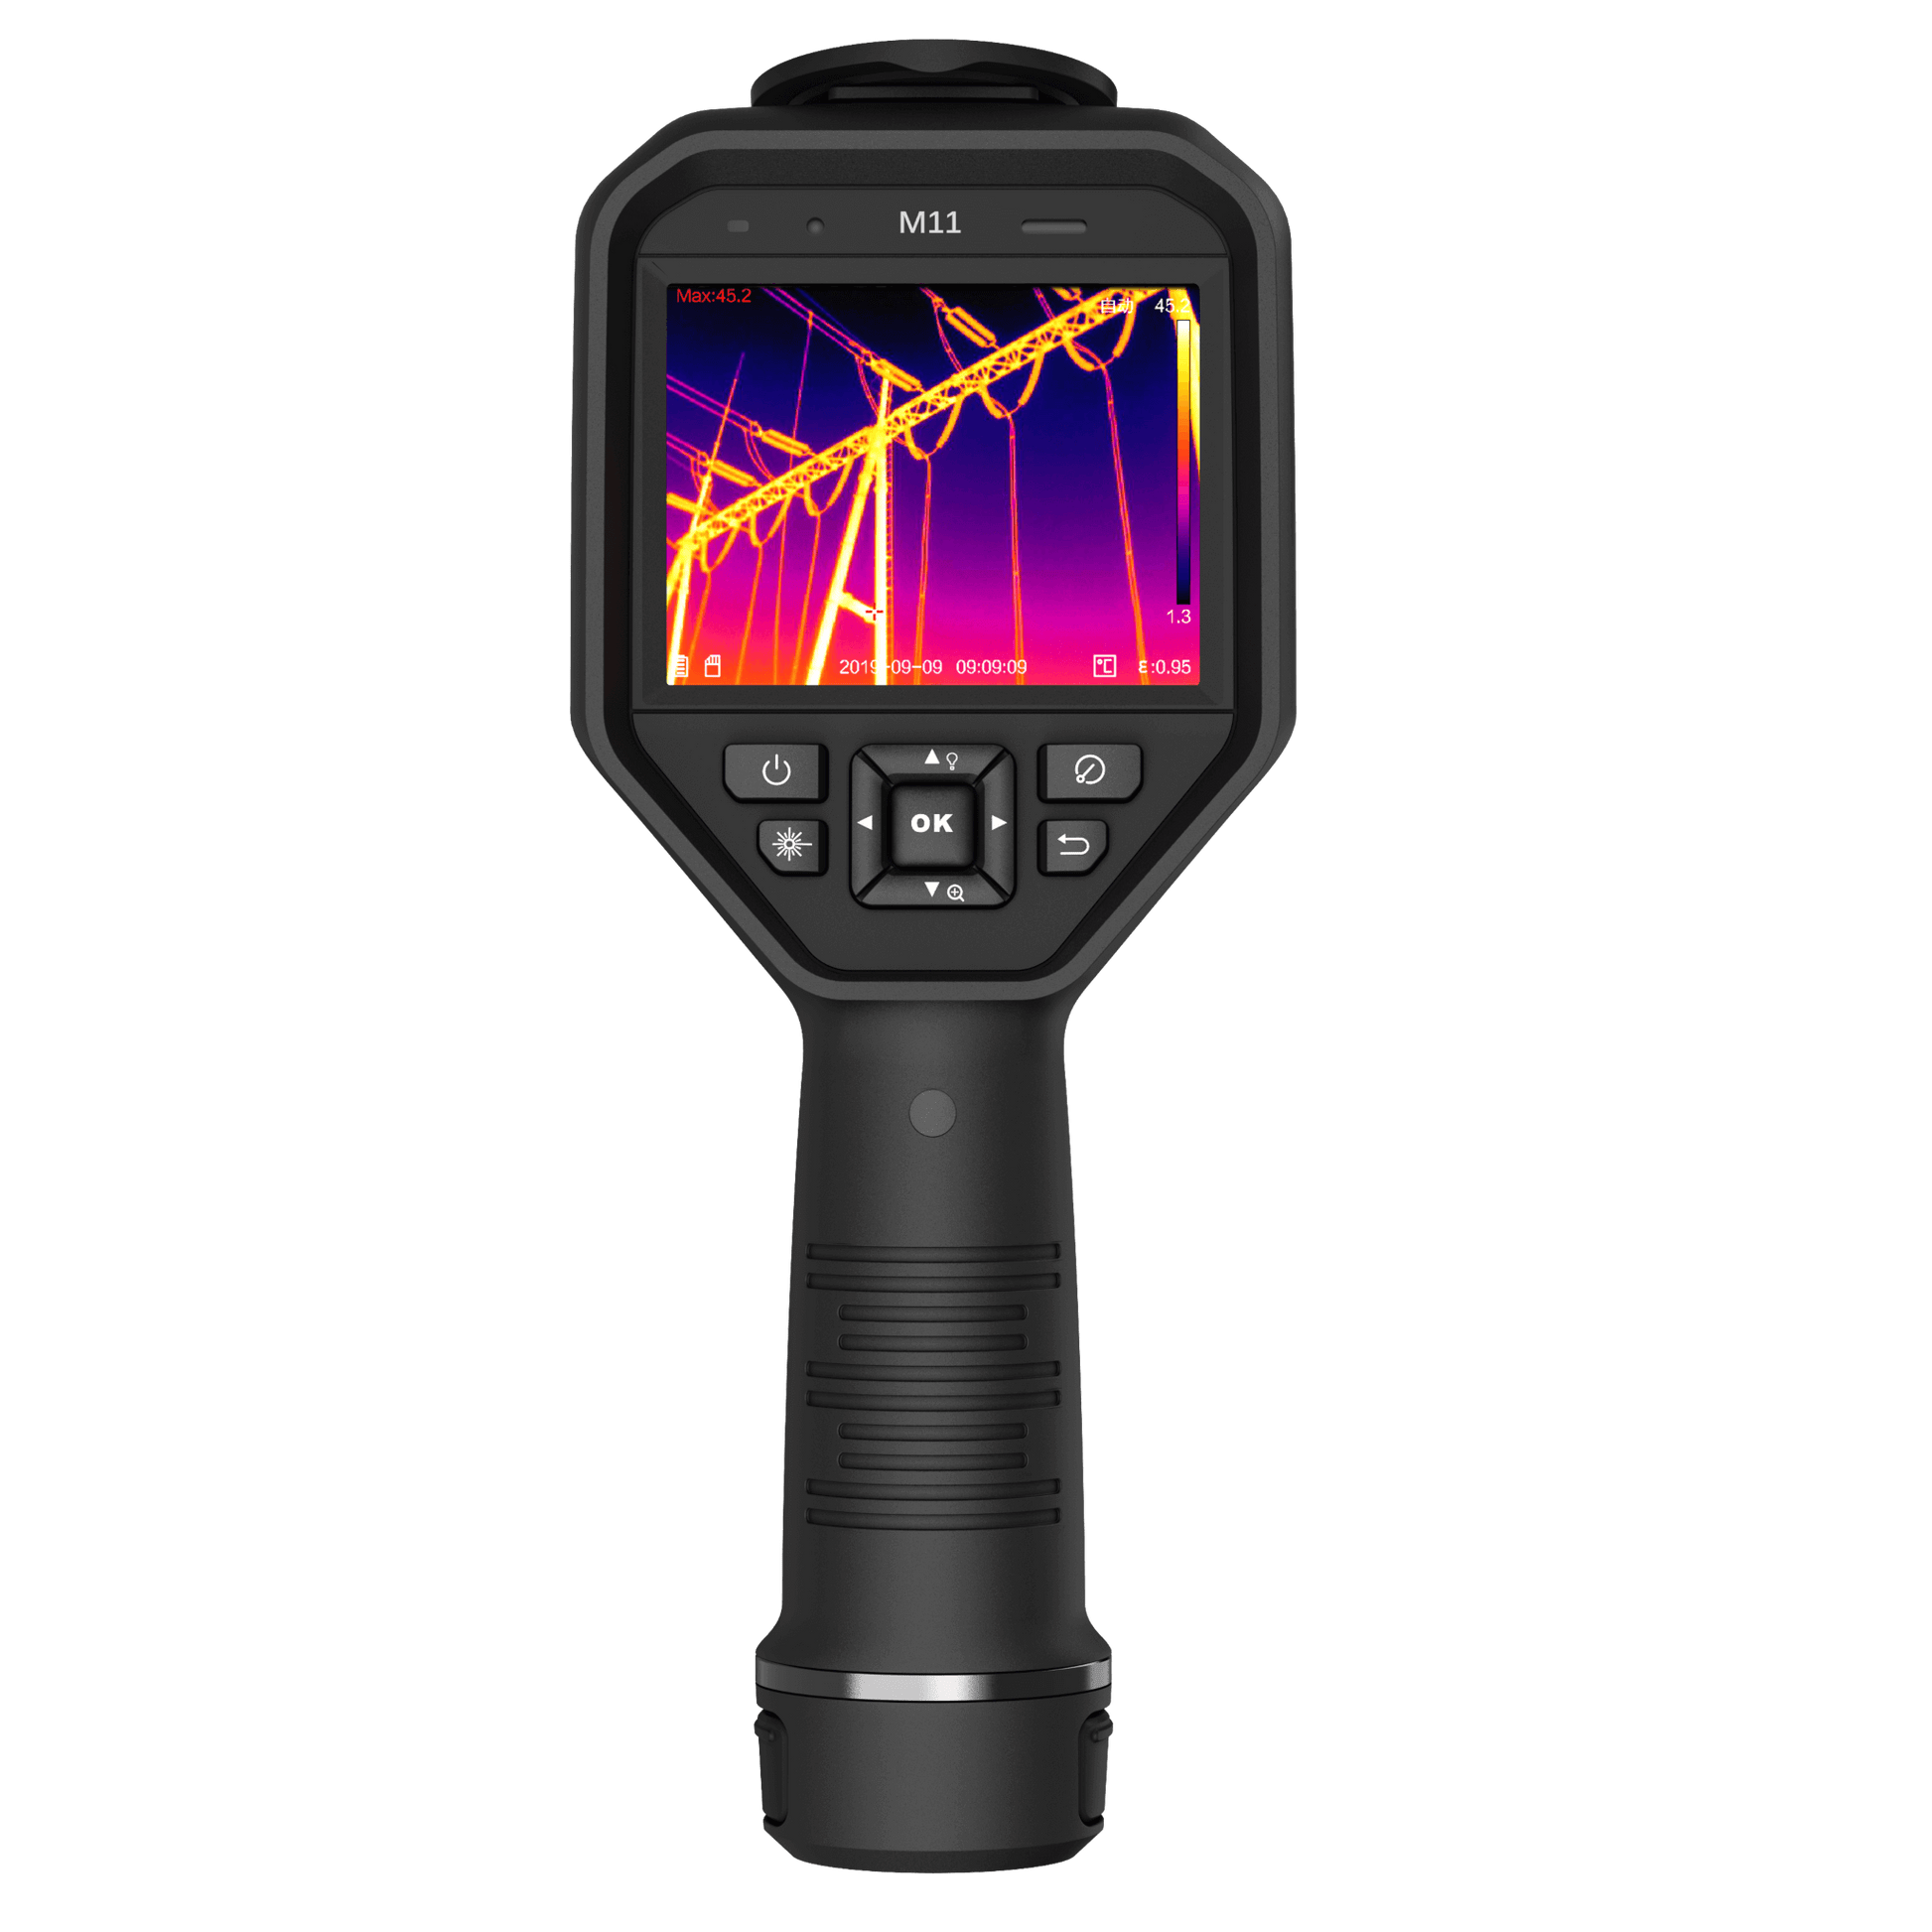 HikMicro M11 Handheld Thermography Camera rear view on a transparent background